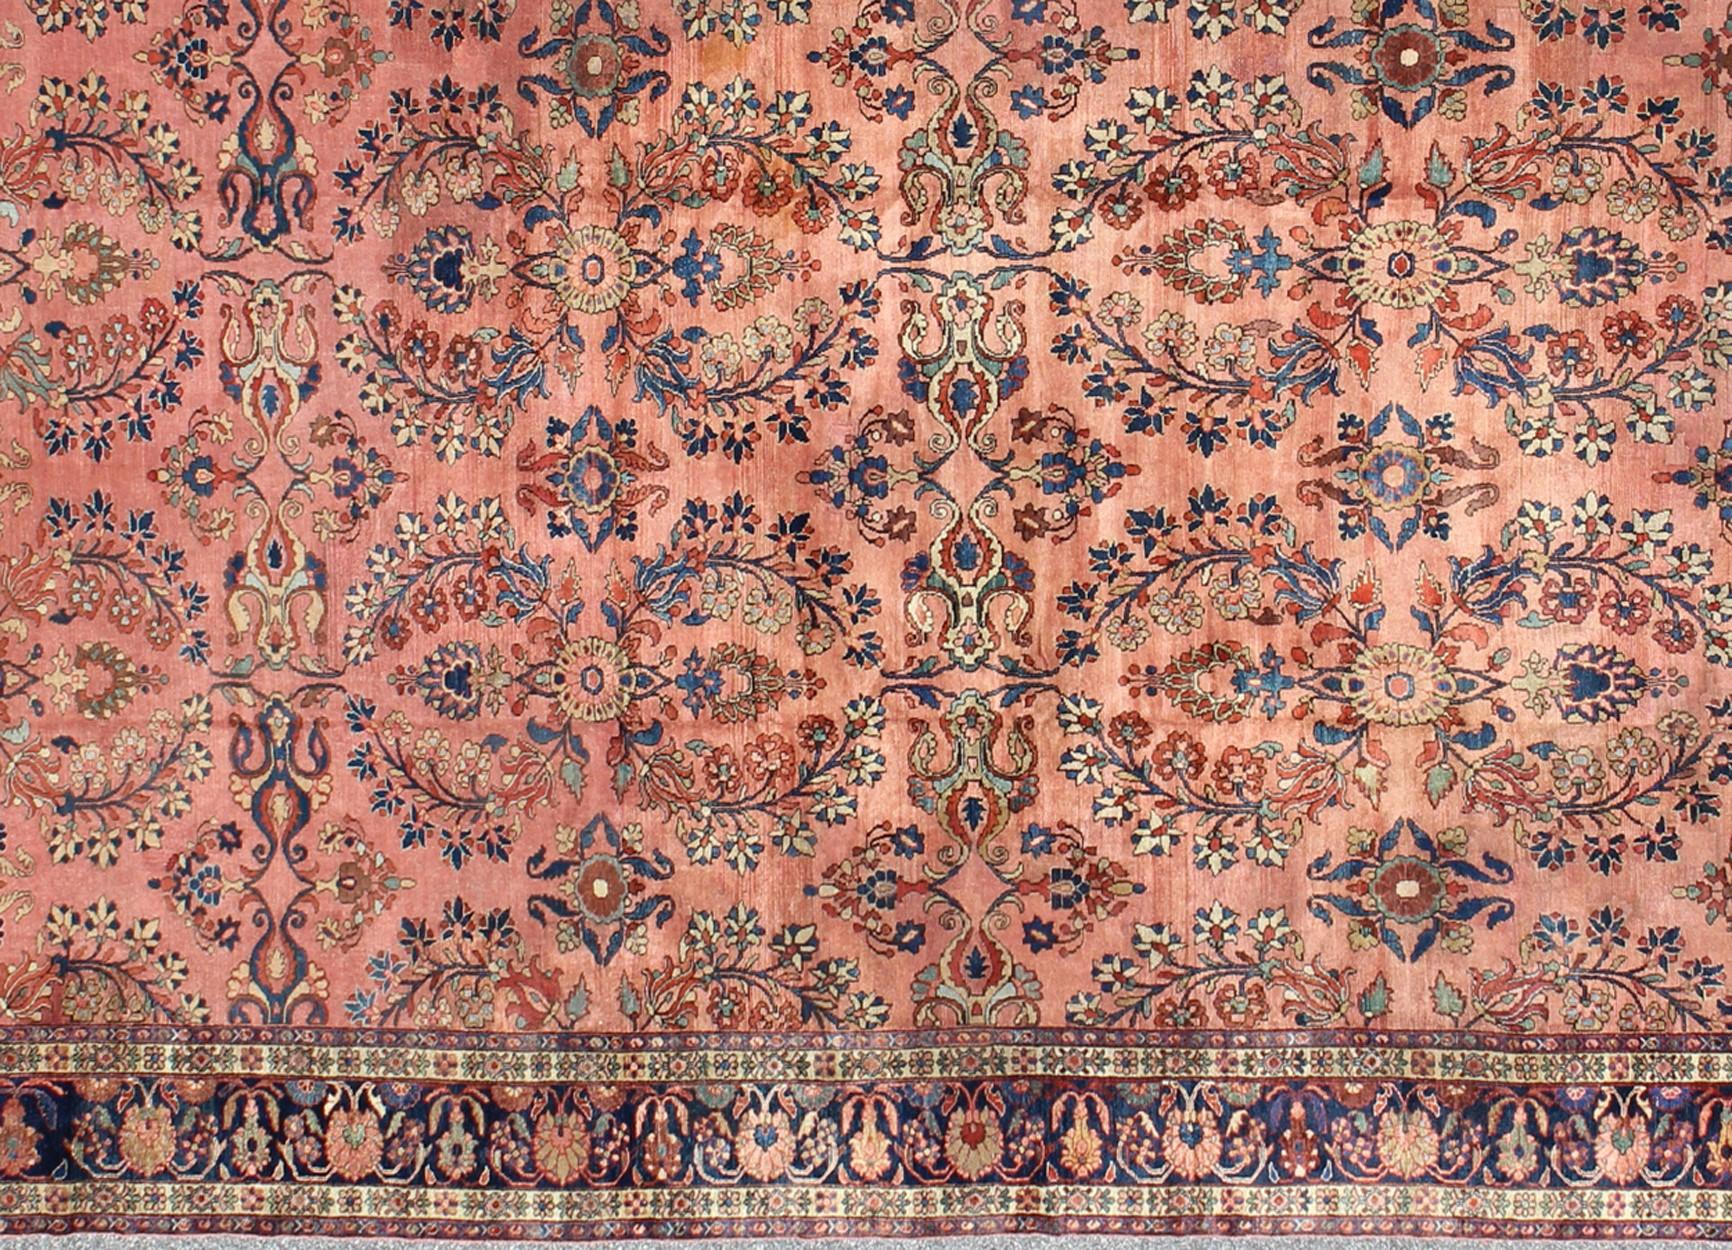 Large Antique Persian Lilihan Rug in Salmon, Blue, Green, Yellow & Rust Colors In Good Condition For Sale In Atlanta, GA